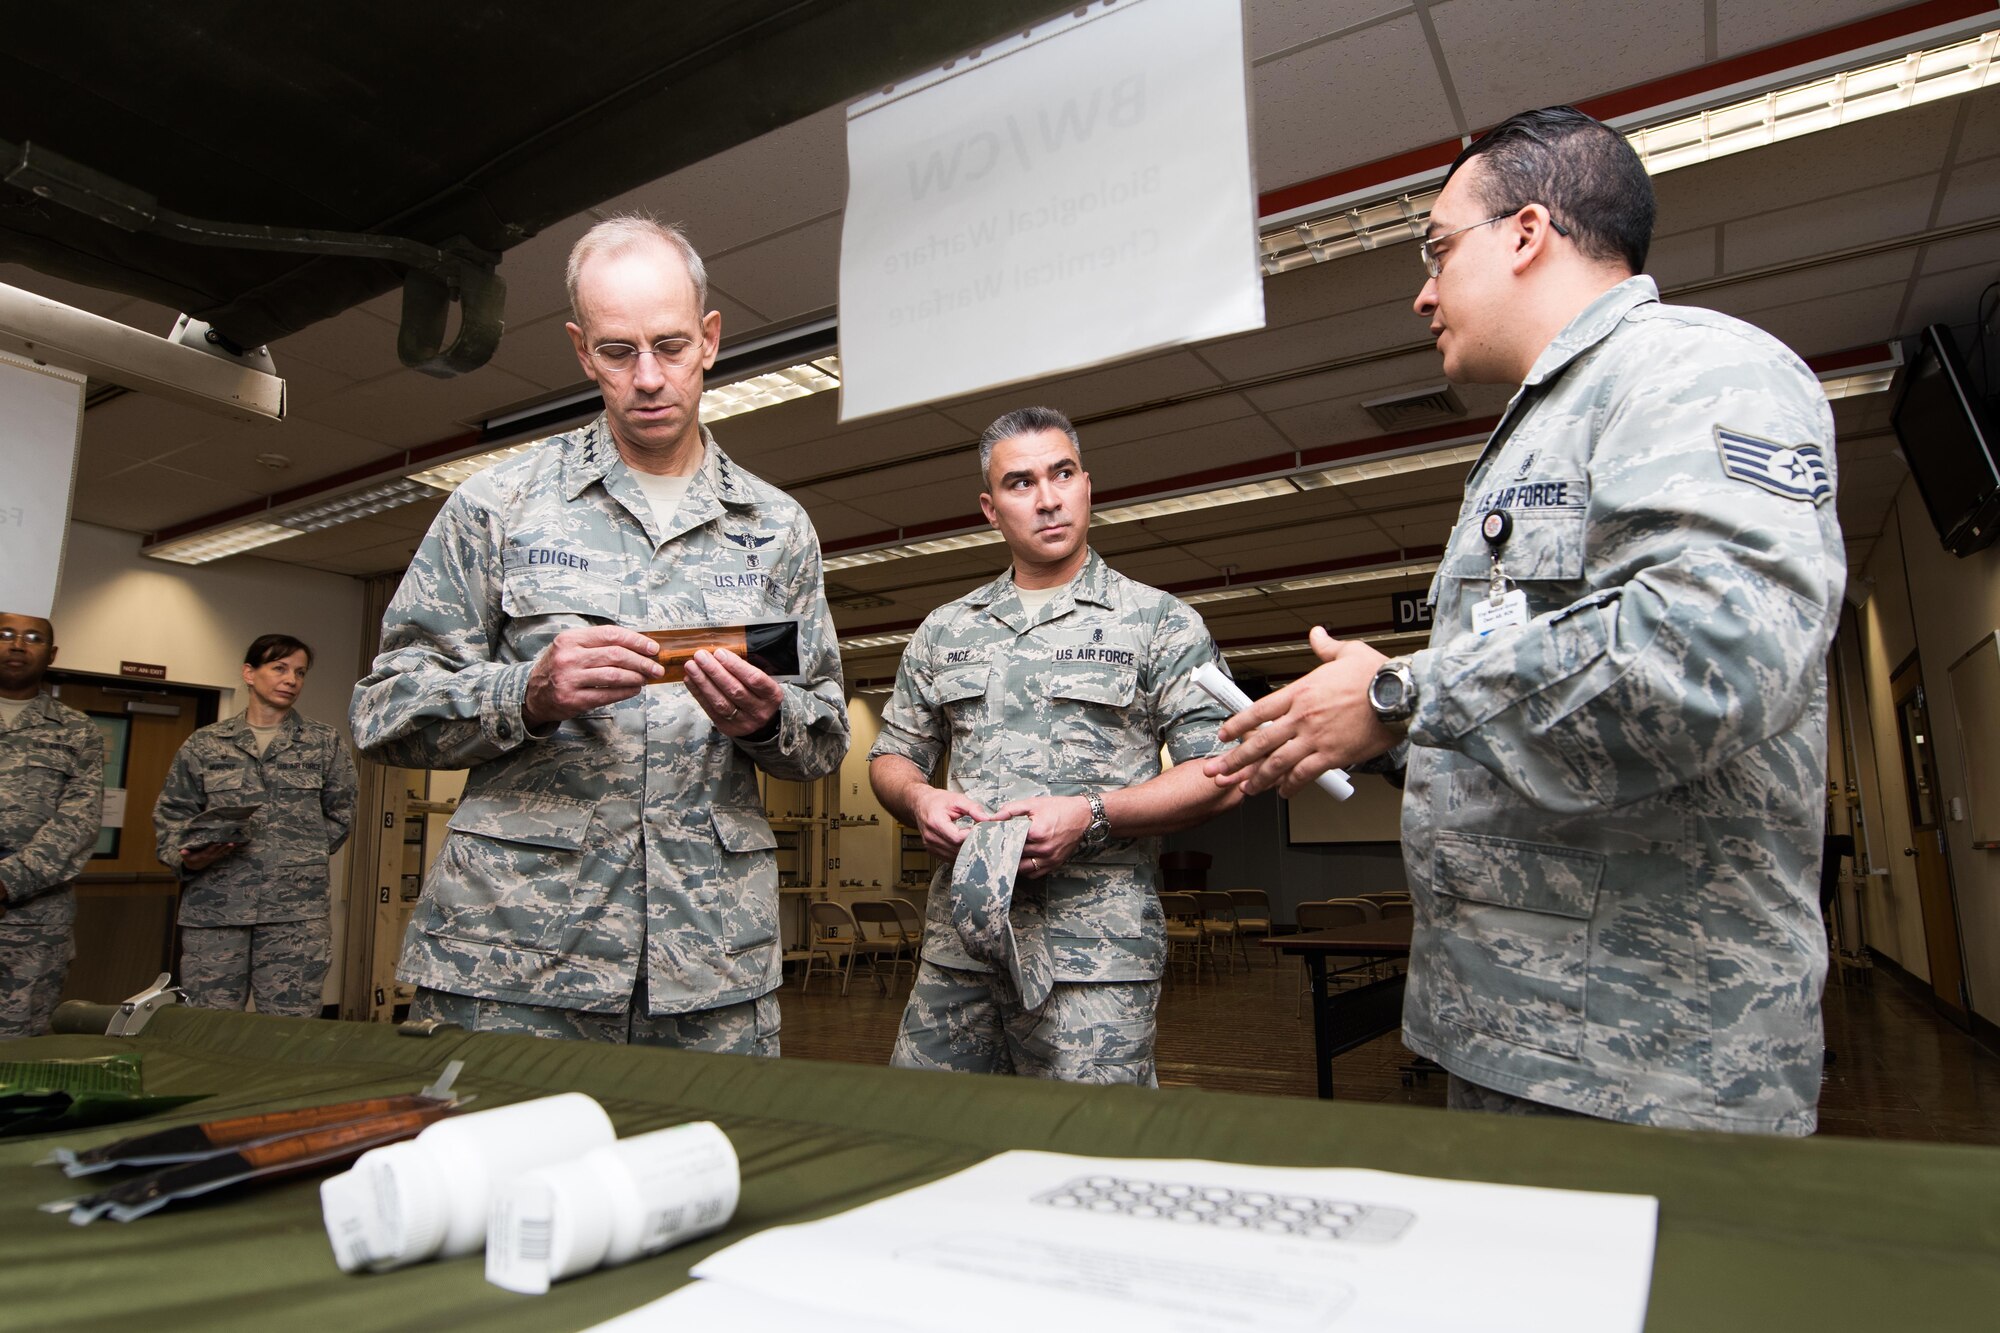 Lt. Gen. (Dr.) Mark A. Ediger, Surgeon General of the Air Force, Headquarters U.S. Air Force, Washington, D.C., and Chief Master Sgt. Jason Pace, Office of the Surgeon General medical enlisted force chief, receive a briefing by Staff Sgt. Johan Rodriguez, 51st Medical Support Squadron logistics technician, on the 51st Medical Group’s Biological Warfare/Chemical Warfare program Sept. 14, 2016, at Osan Air Base, Republic of Korea. The BW/CW program is designed to take contingency medical care and import it into squadrons across Osan to better prepare for contingency operations. (U.S. Air Force photo by Senior Airman Dillian Bamman)